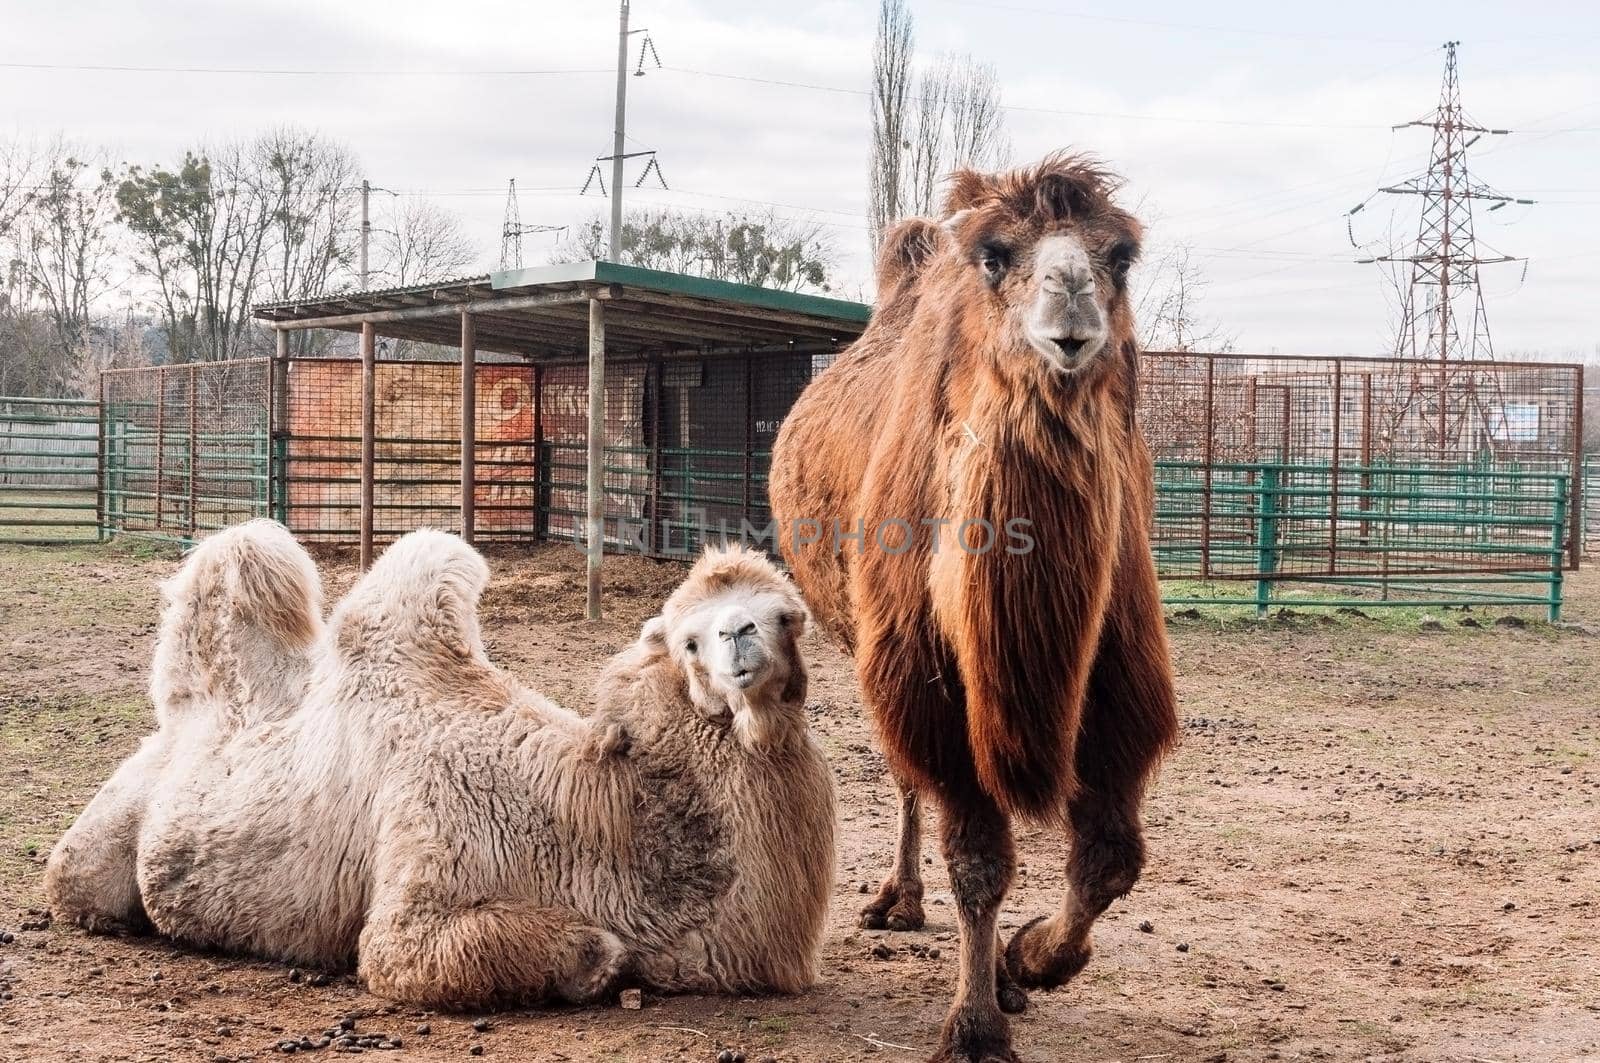 Two Bactrian Camels are resting in their paddock on the farm. Camelus bactrianus, a large hoofed animal living in the steppes of Central Asia.